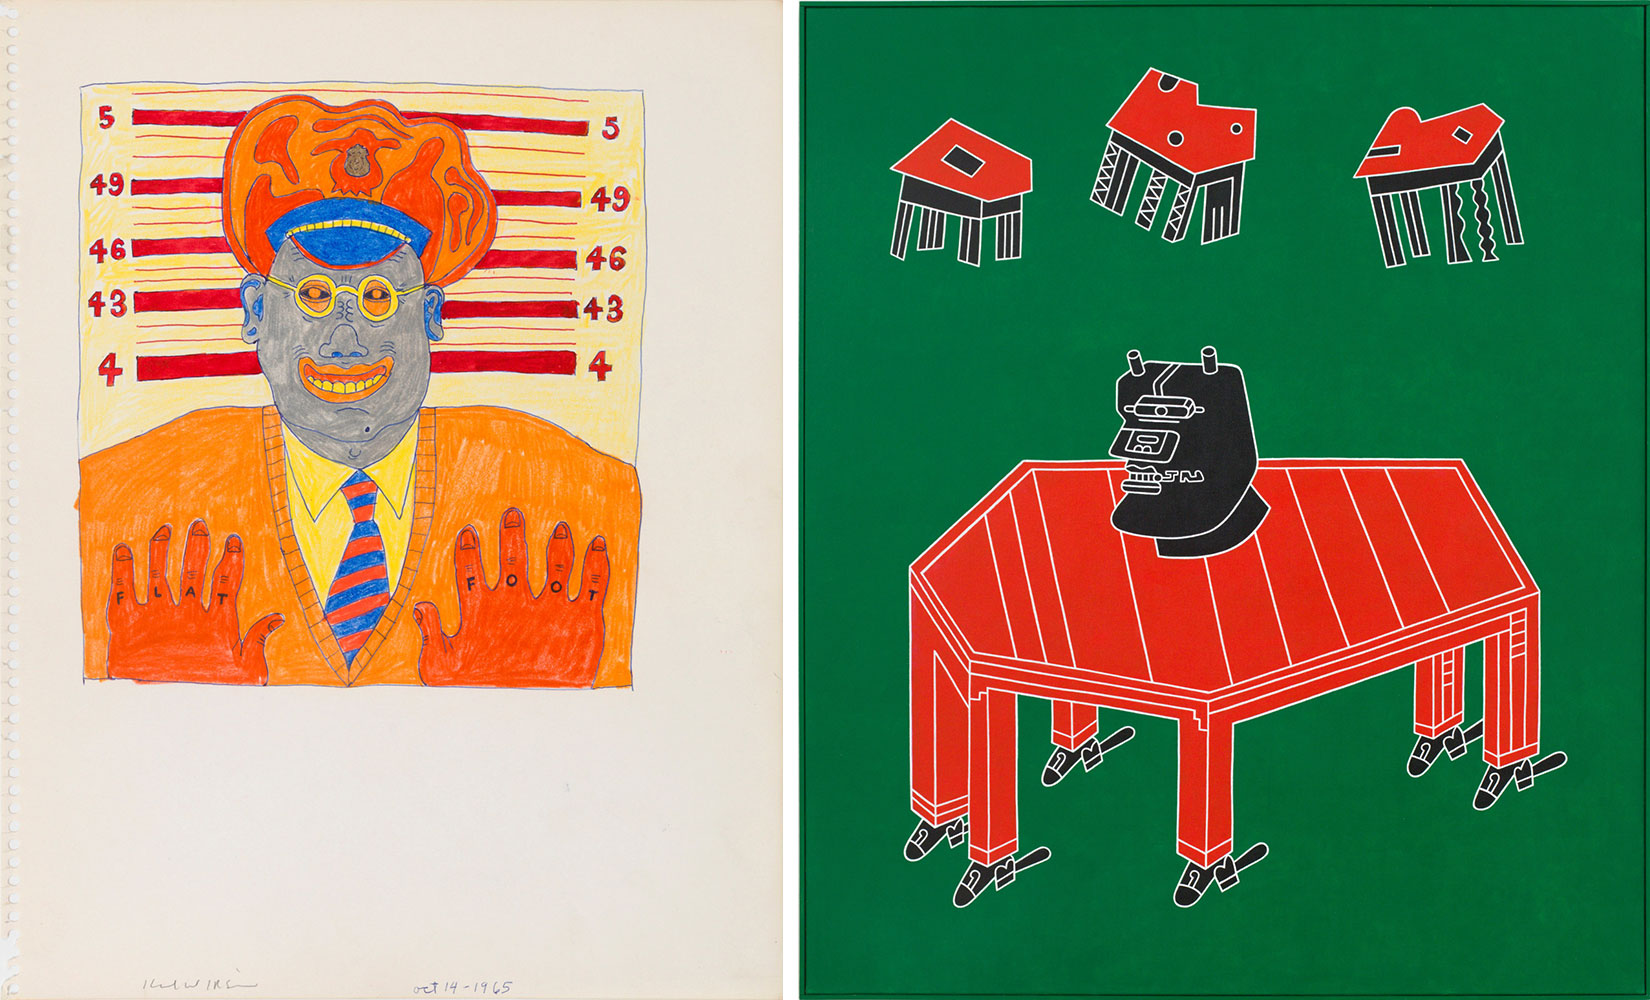 Left: Karl Wirsum, Untitled (Study for Flat Foot), 1968, Ink and color pencil on paper, 14 x 11 inches, © Karl Wirsum, Courtesy the artist and Derek Eller GalleryRight: Karl Wirsum, Turning the Tables on My Bald Head, 2013, acrylic on canvas with painted wood frame, 47.5 x 40 inches, © Karl Wirsum, Courtesy the artist and Derek Eller Gallery 